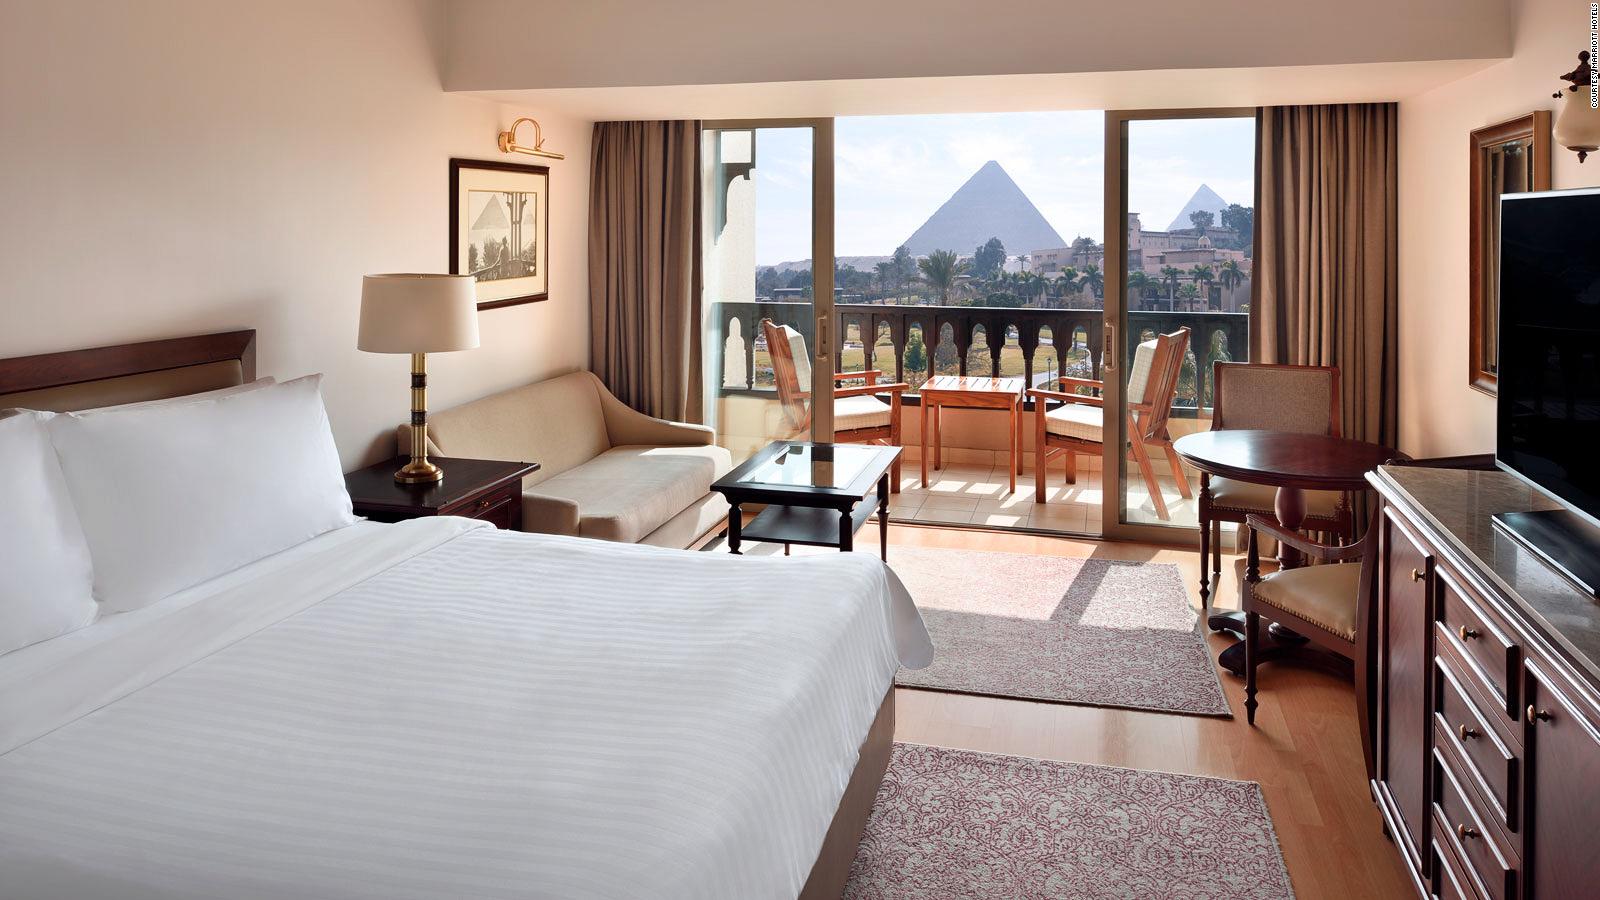 Egypt S Vintage Hotels Sleeping In Ancient History Cnn Travel